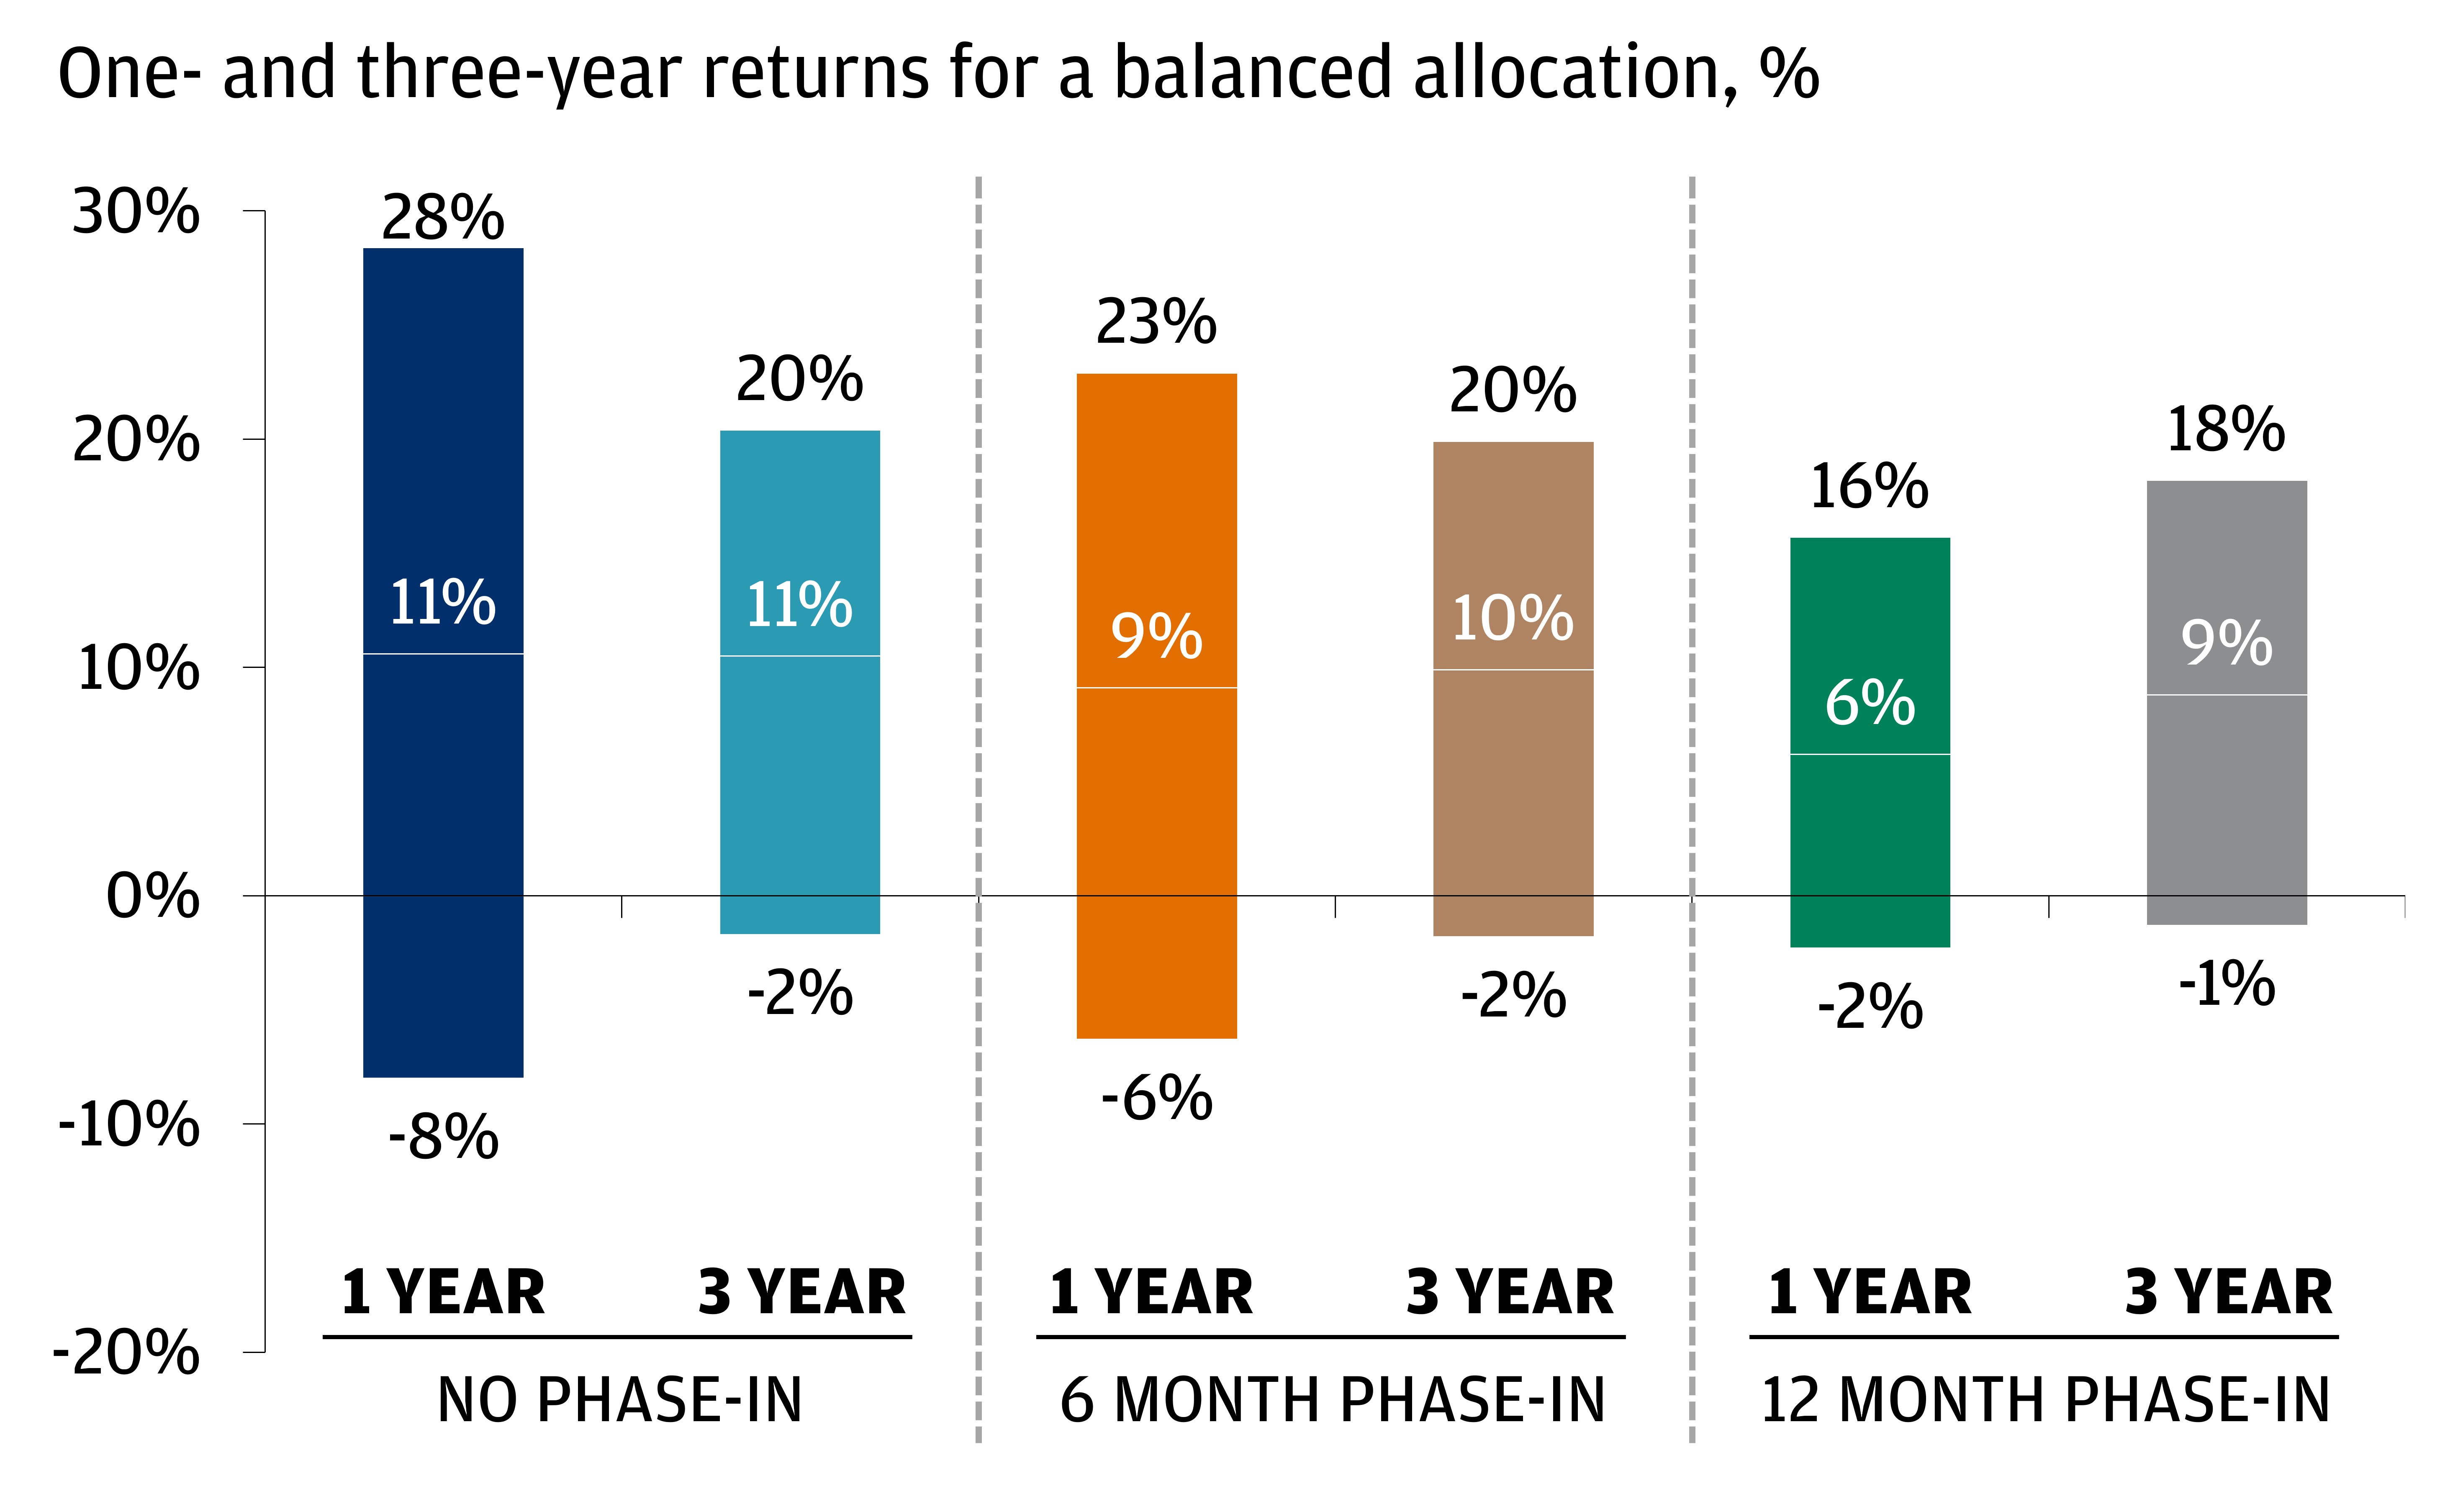 The chart shows the one- and three-year returns for a balanced allocation. 